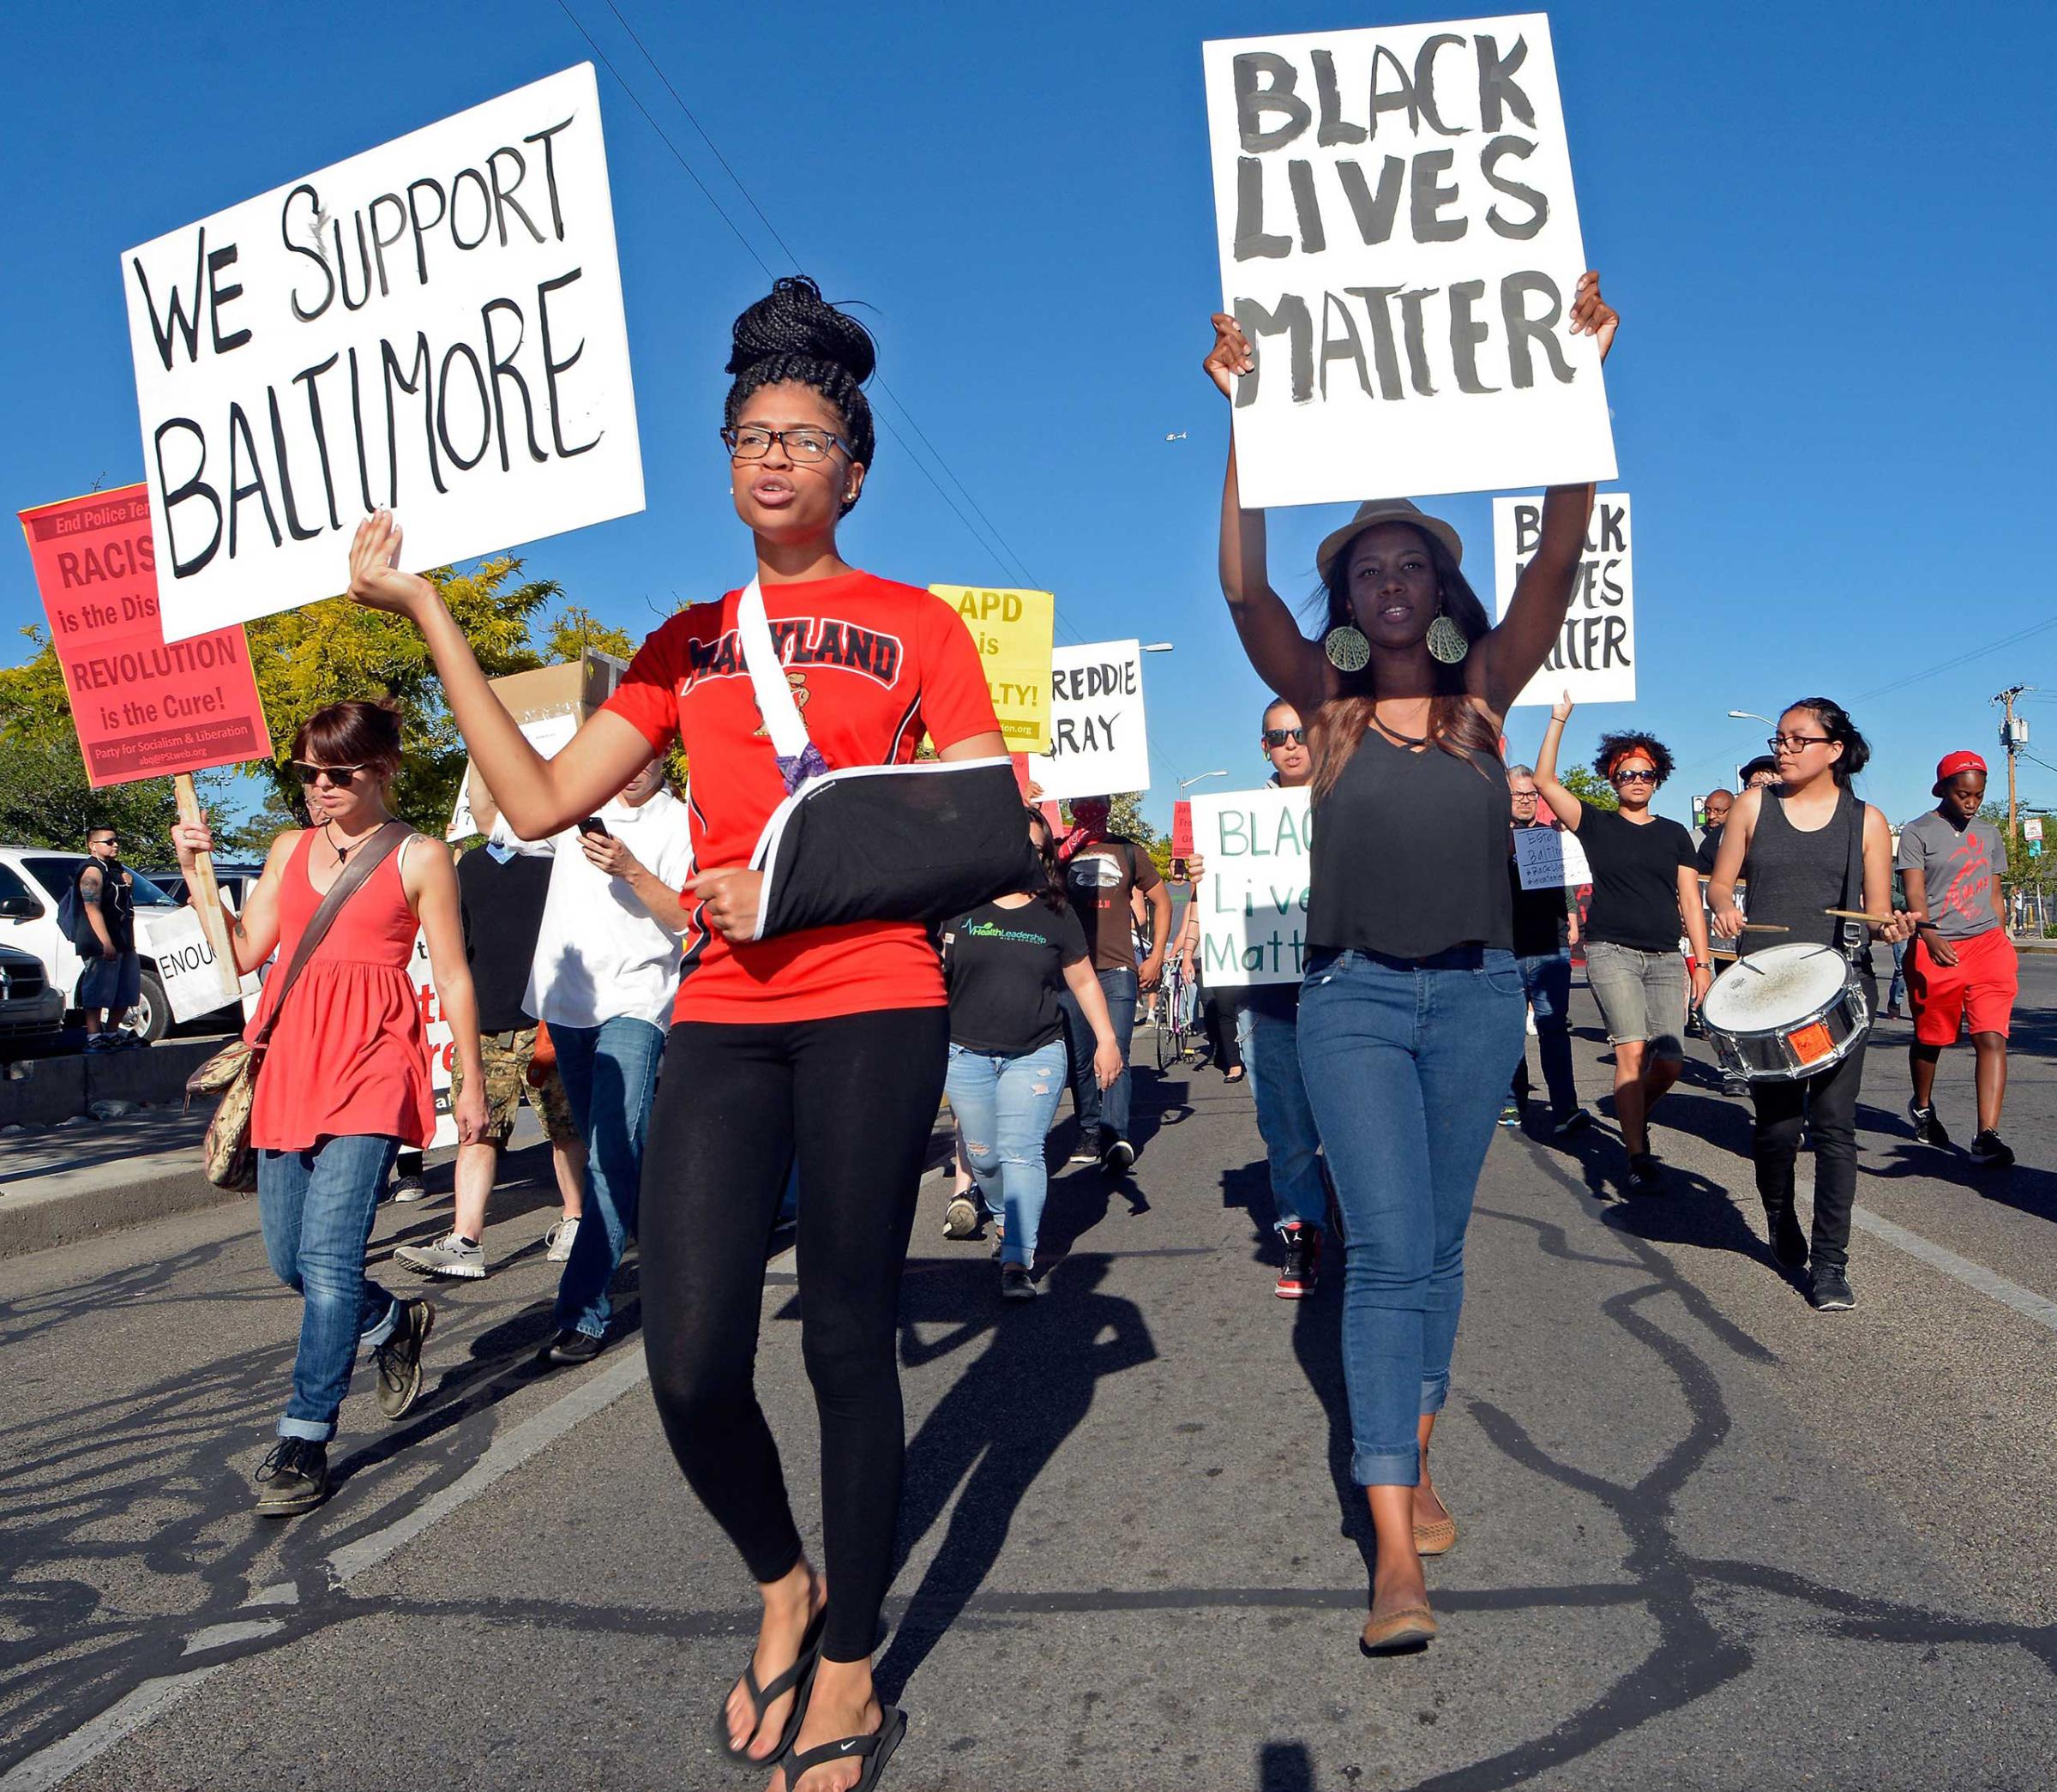 Cinnamon Burton and Skye Johnson join protesters, in solidarity with Baltimore, marching in front of the University of New Mexico in Albuquerque, N.M. on April 29, 2015.